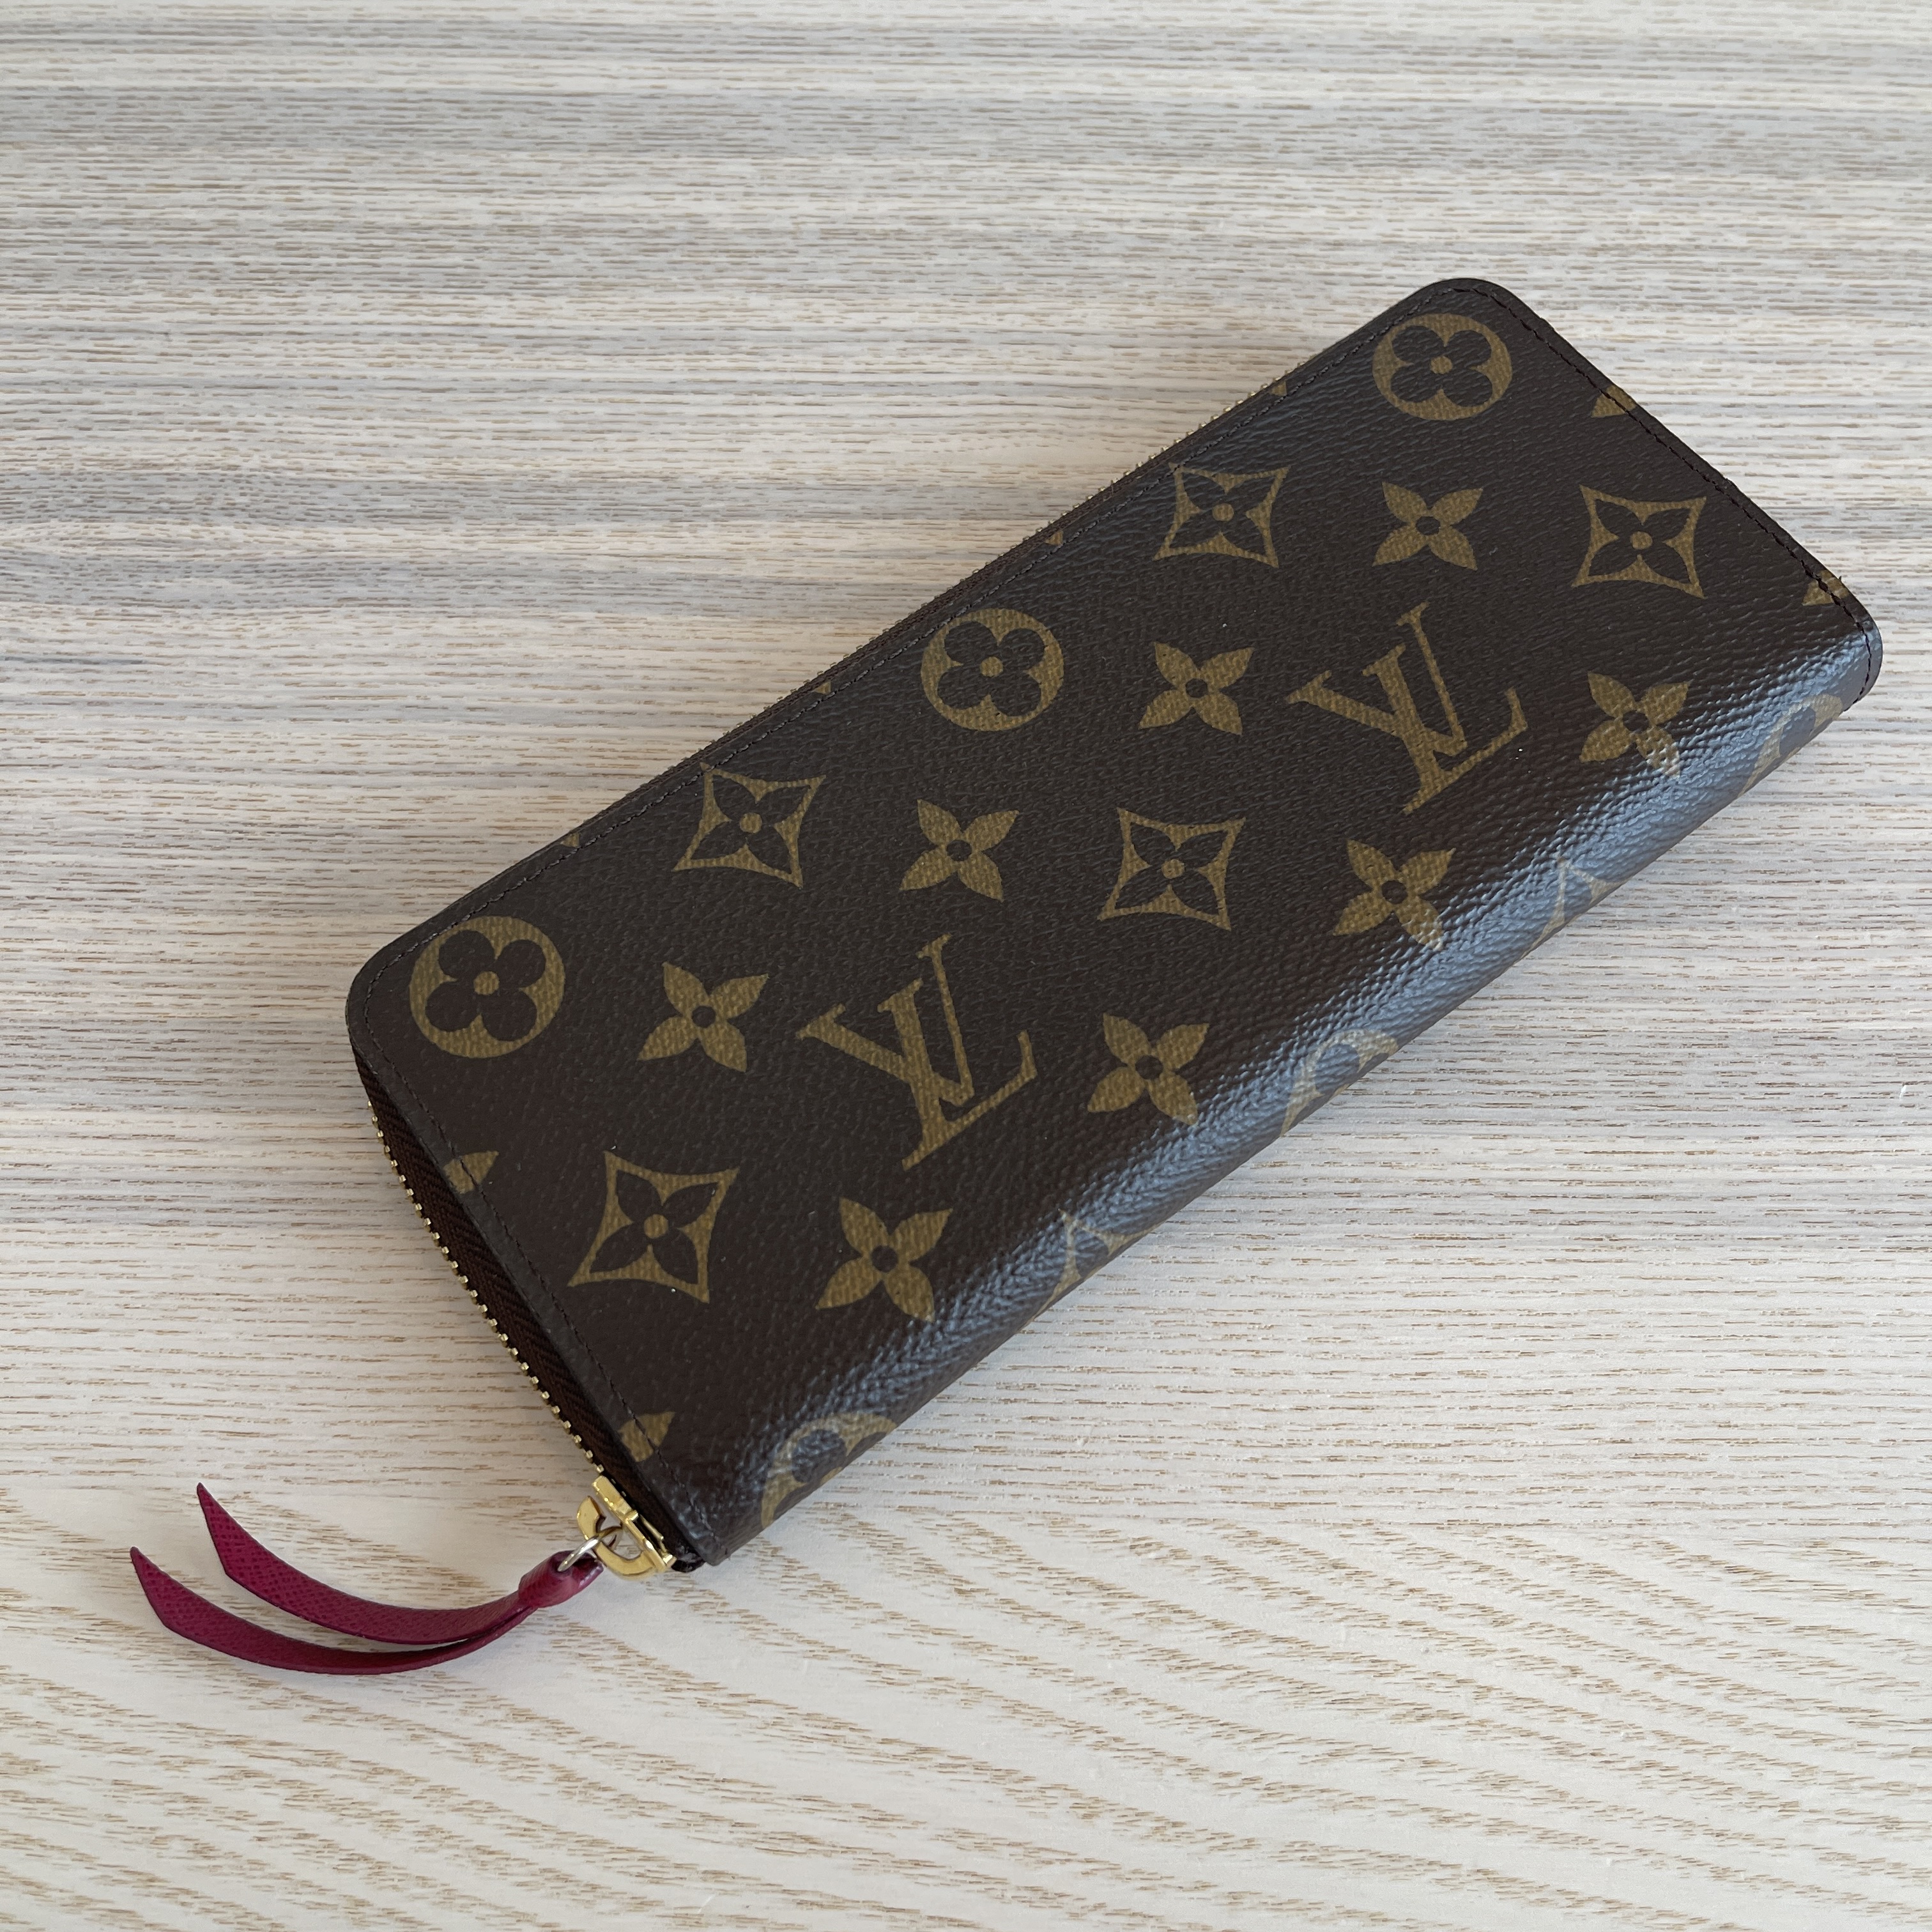 HER Authentic - Louis Vuitton Monogram Clemence Wallet in fuchsia.  Purchased new in November 2020. Can pass as new. $540. Available on our  website.